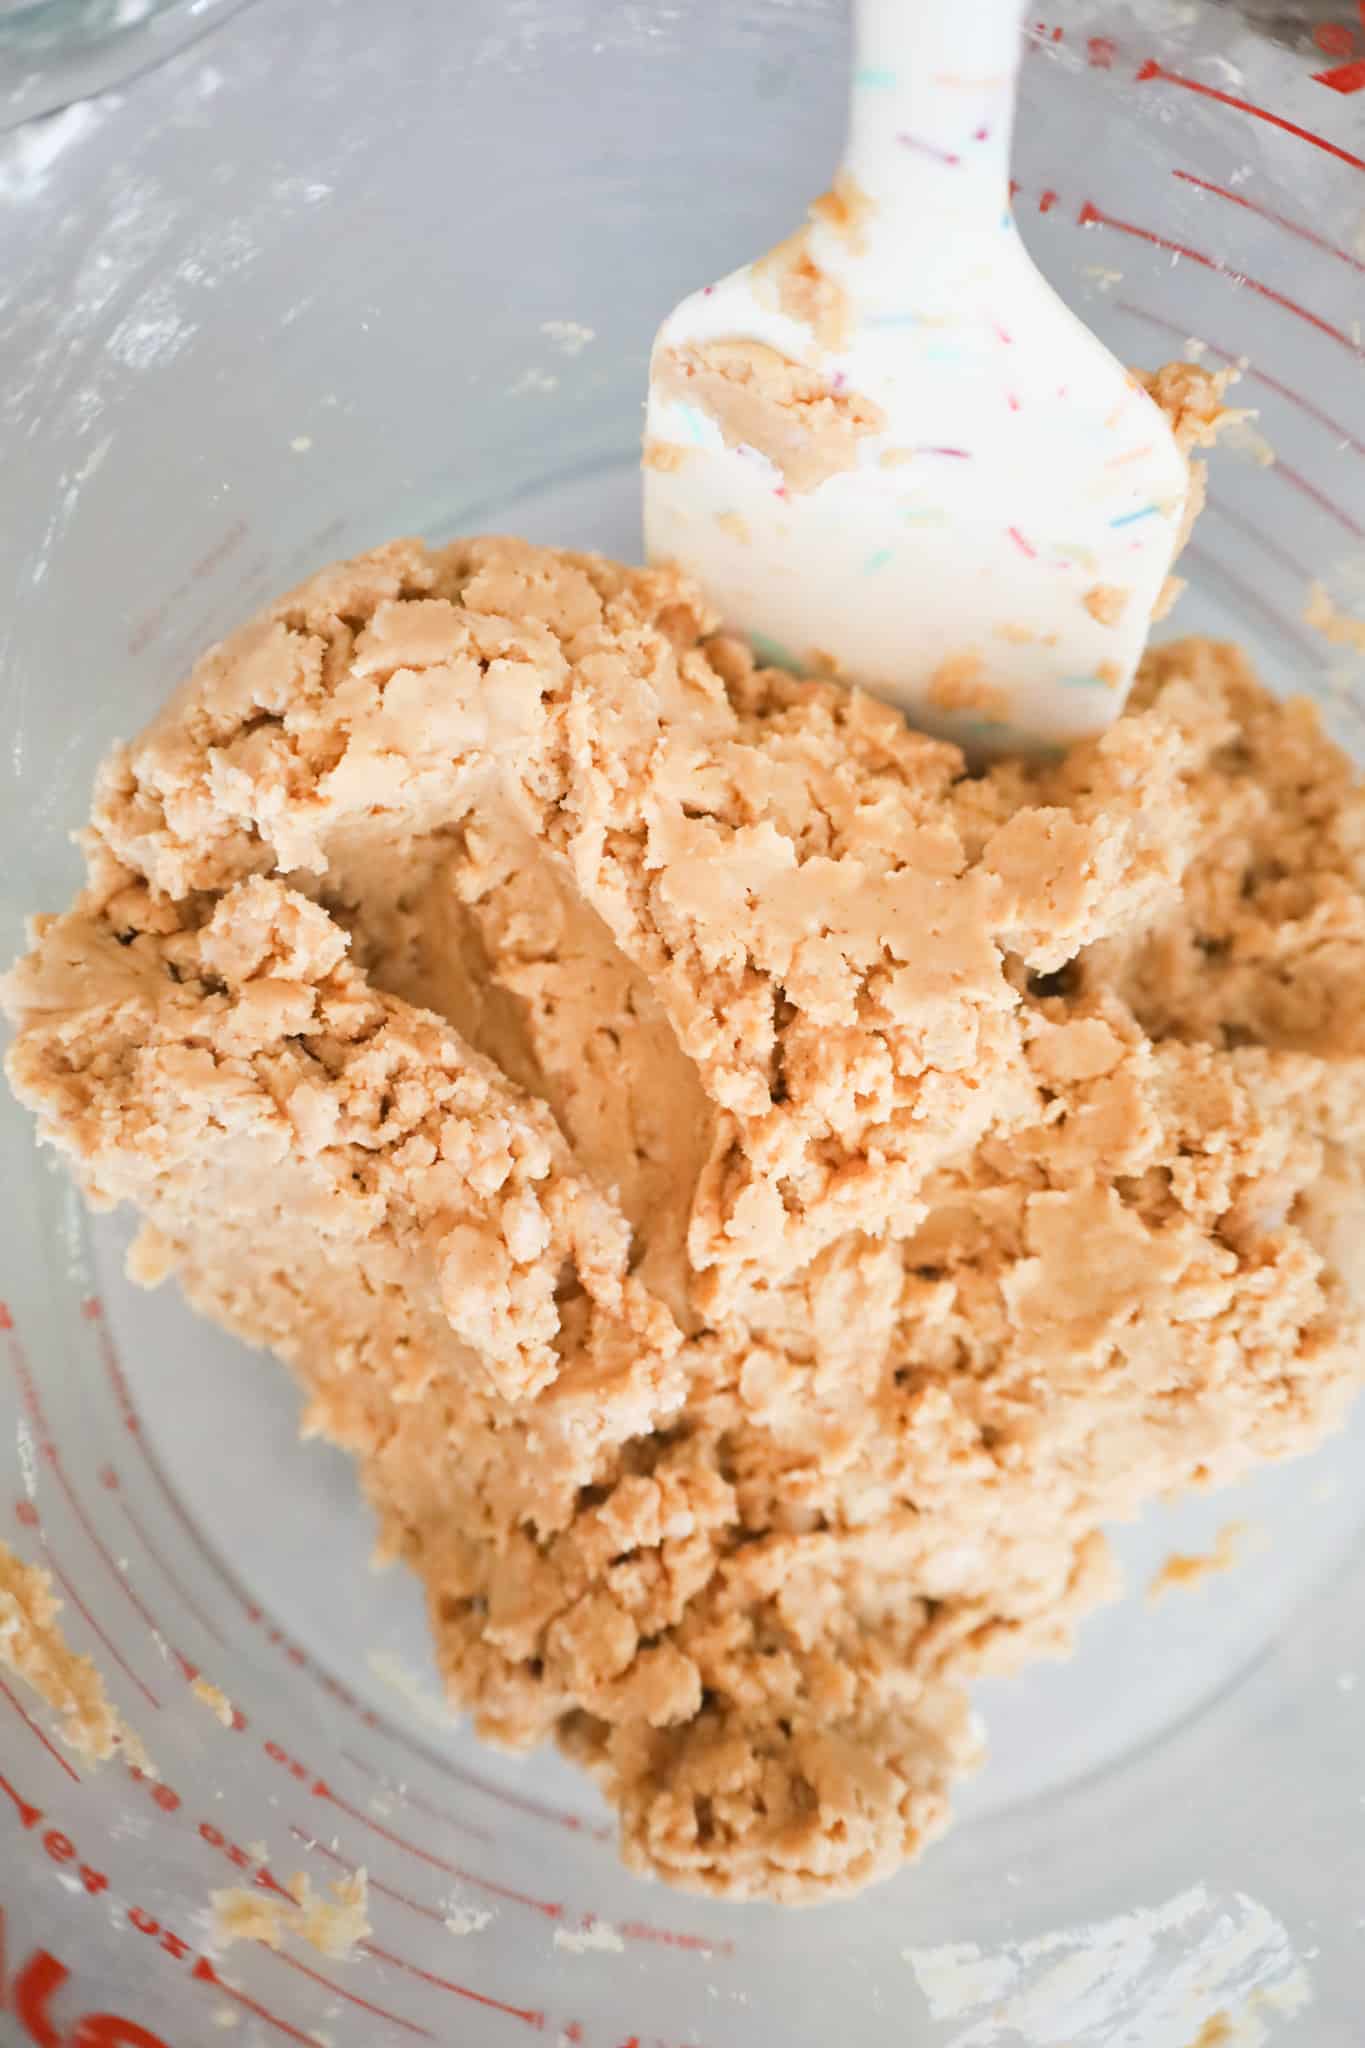 peanut butter and rice krispies mixture in a glas sbowl